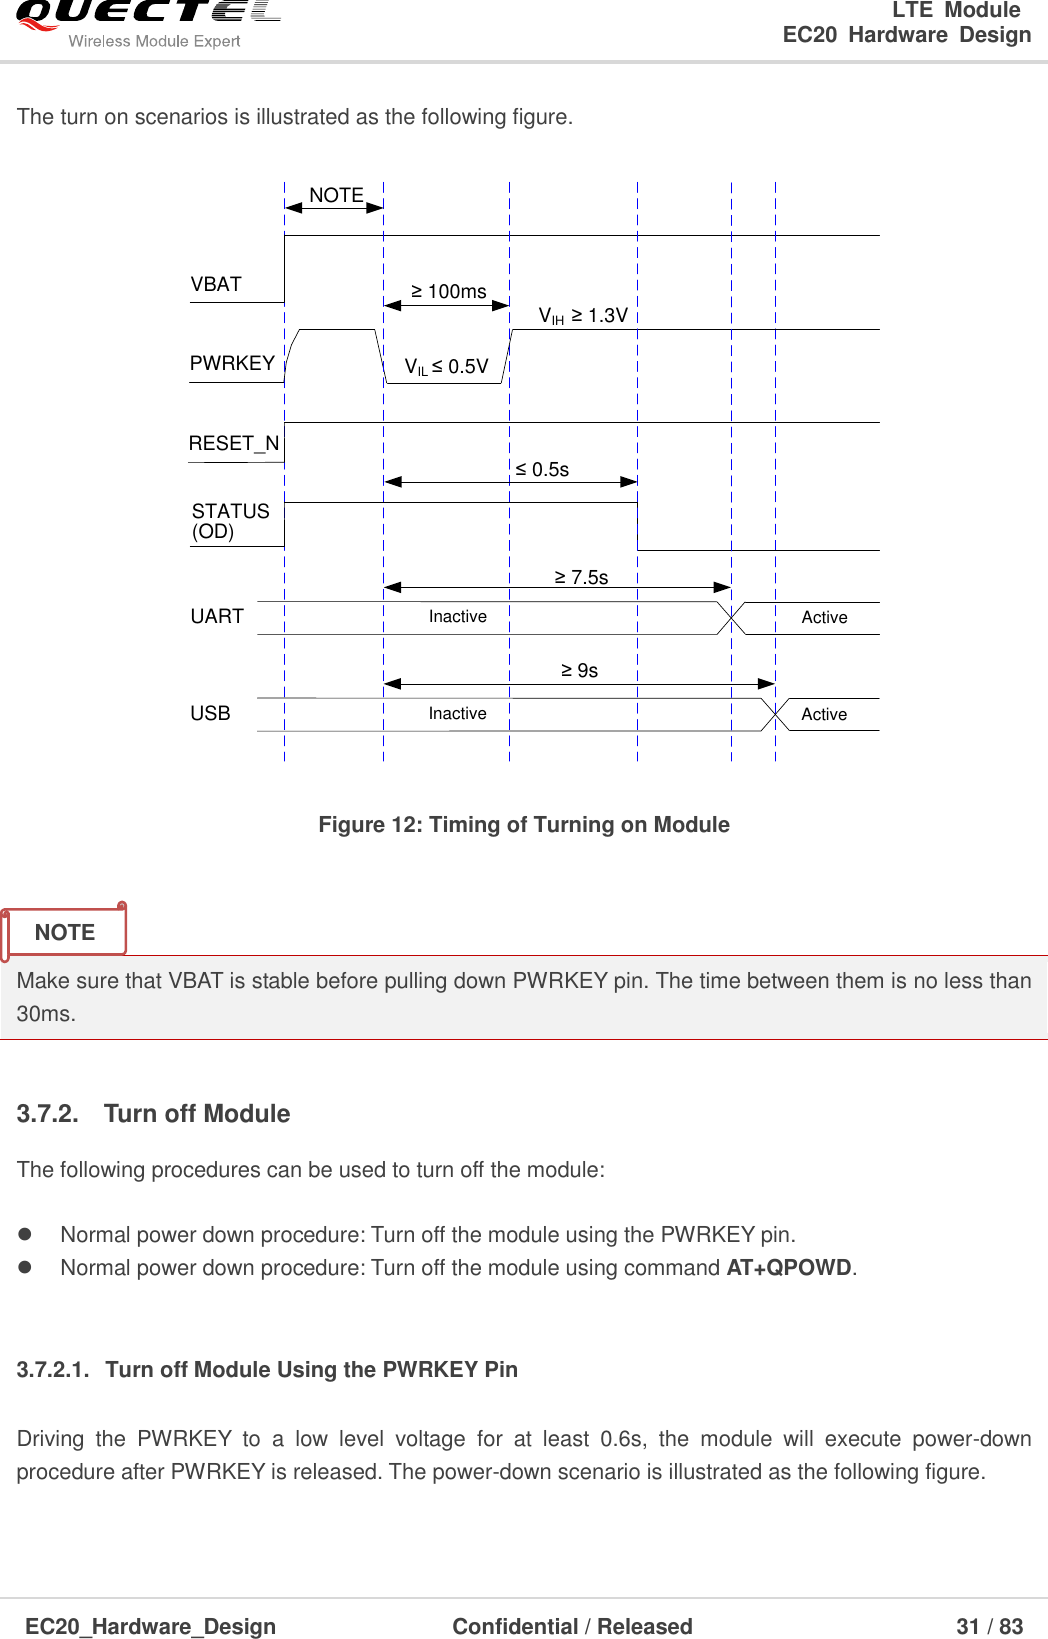                                                                        LTE  Module                                                                   EC20  Hardware  Design  EC20_Hardware_Design                  Confidential / Released                            31 / 83     The turn on scenarios is illustrated as the following figure.  VIL ≤ 0.5VVIH  ≥ 1.3VVBATPWRKEY≥ 100msRESET_NSTATUS(OD)≤ 0.5s≥ 7.5sInactive ActiveUARTNOTEInactive ActiveUSB≥ 9s Figure 12: Timing of Turning on Module   Make sure that VBAT is stable before pulling down PWRKEY pin. The time between them is no less than 30ms.  3.7.2.  Turn off Module The following procedures can be used to turn off the module:    Normal power down procedure: Turn off the module using the PWRKEY pin.   Normal power down procedure: Turn off the module using command AT+QPOWD.  3.7.2.1.  Turn off Module Using the PWRKEY Pin Driving  the  PWRKEY  to  a  low  level  voltage  for  at  least  0.6s,  the  module  will  execute  power-down procedure after PWRKEY is released. The power-down scenario is illustrated as the following figure. NOTE 